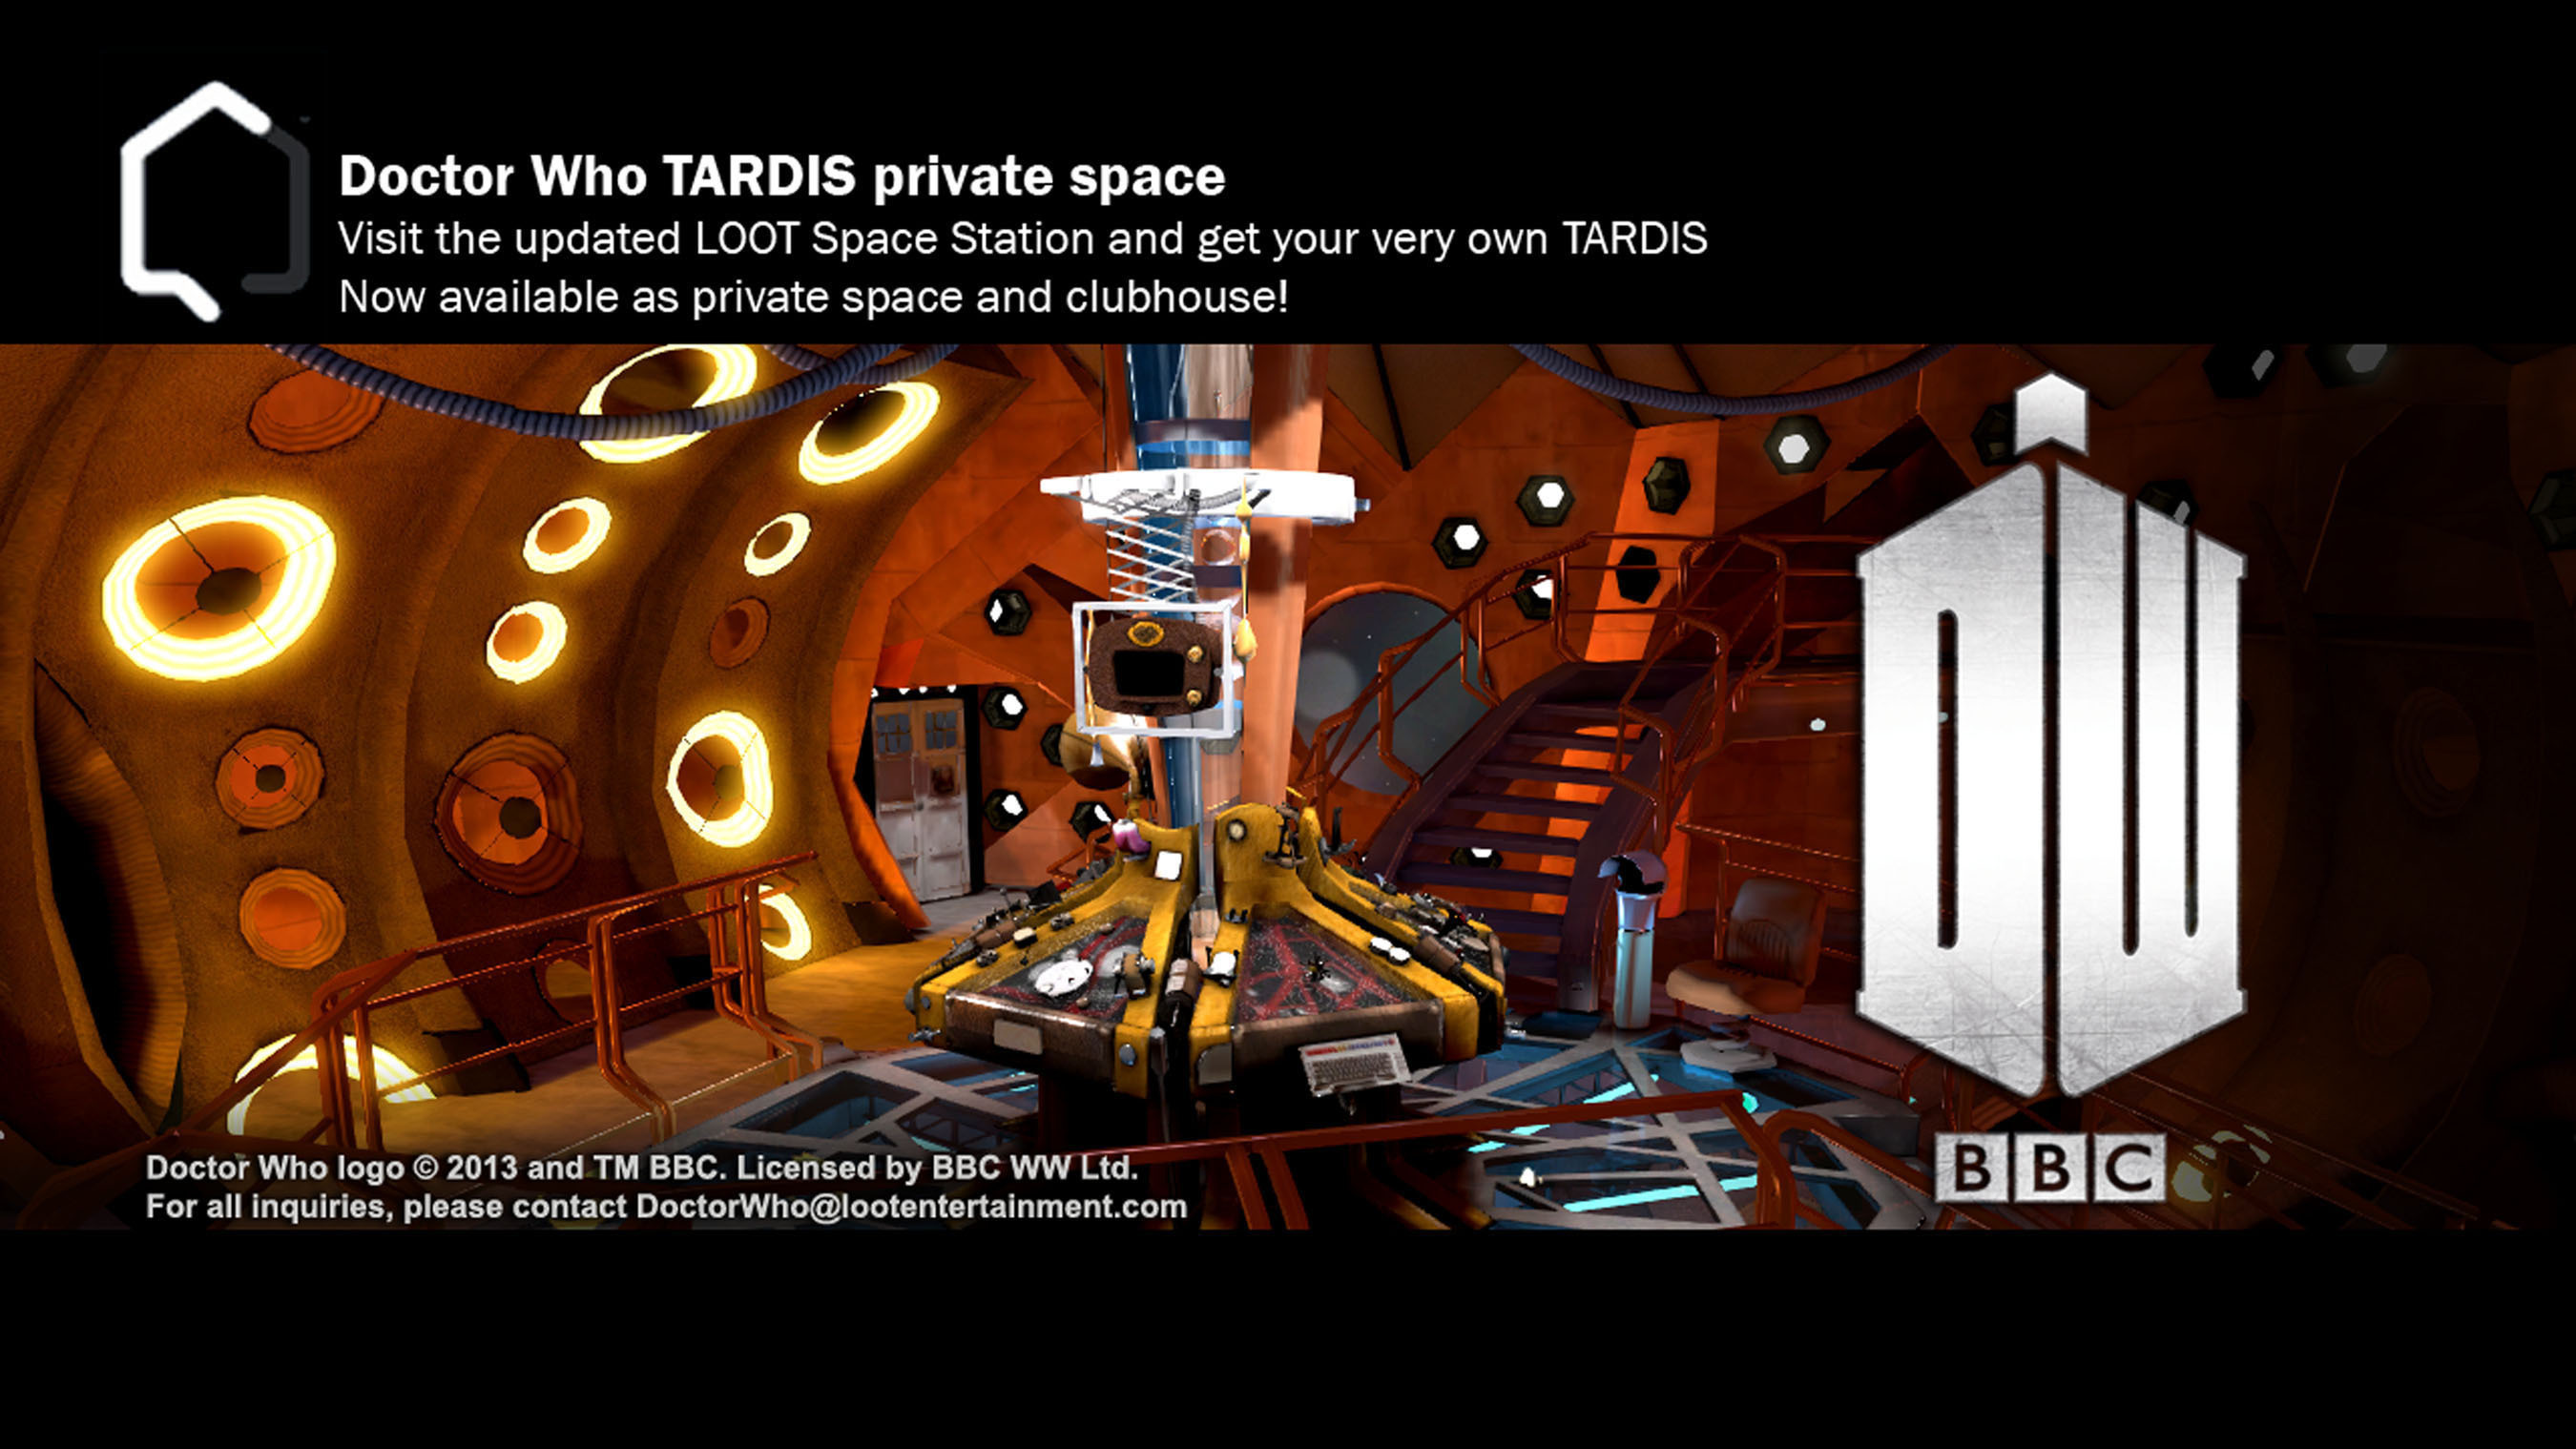 Doctor Who TARDIS Private Space Now Available. (PRNewsFoto/Sony DADC New Media Solutions) (PRNewsFoto/SONY DADC NEW MEDIA SOLUTIONS)